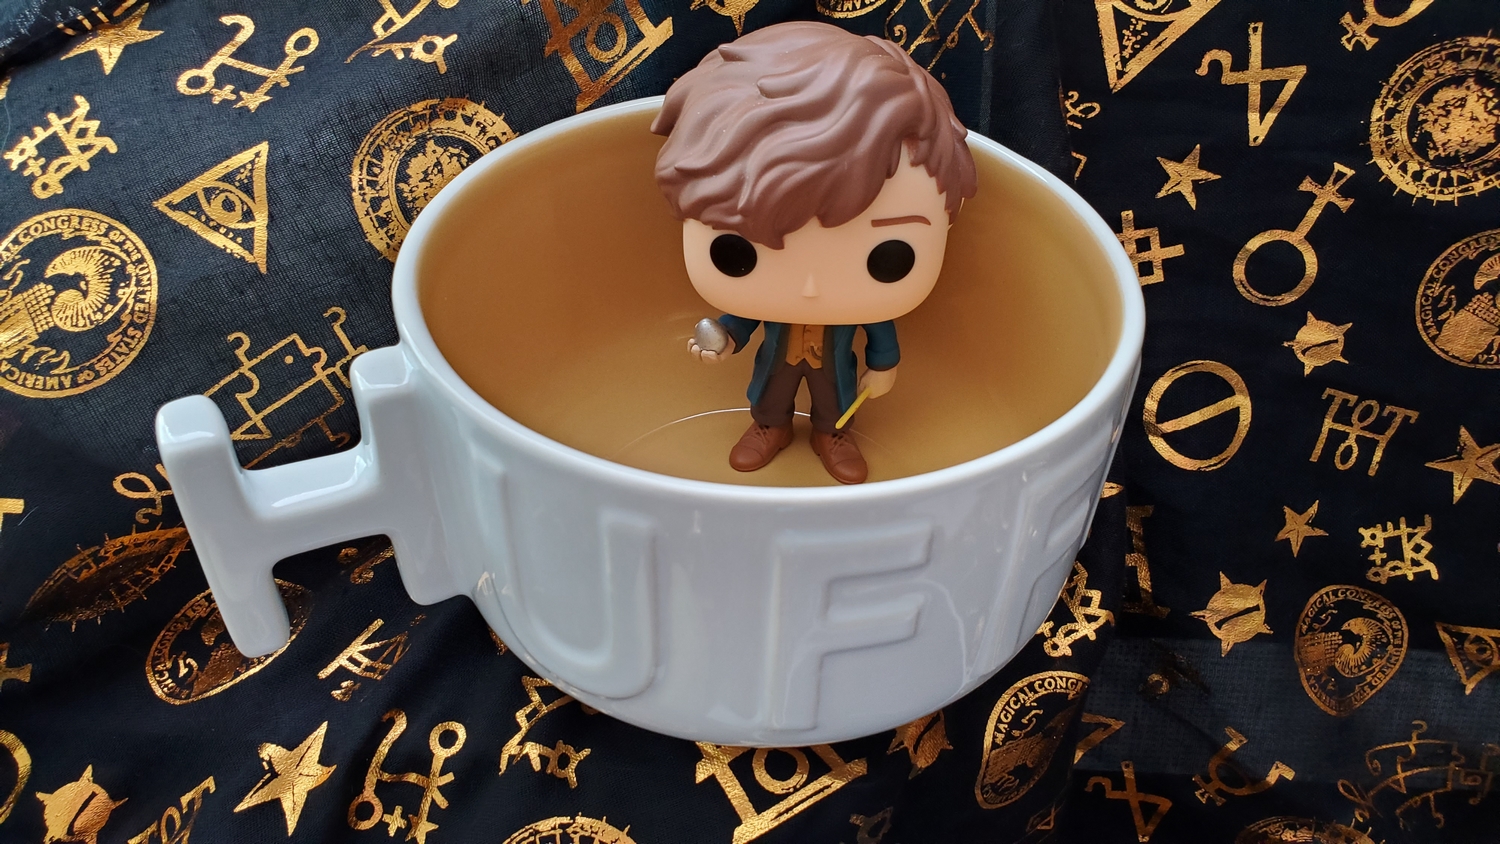 Harry Potter Soup Mug from Hallmark Gold Crown – Hufflepuff, pictured with Newt Scamander Funko POP!